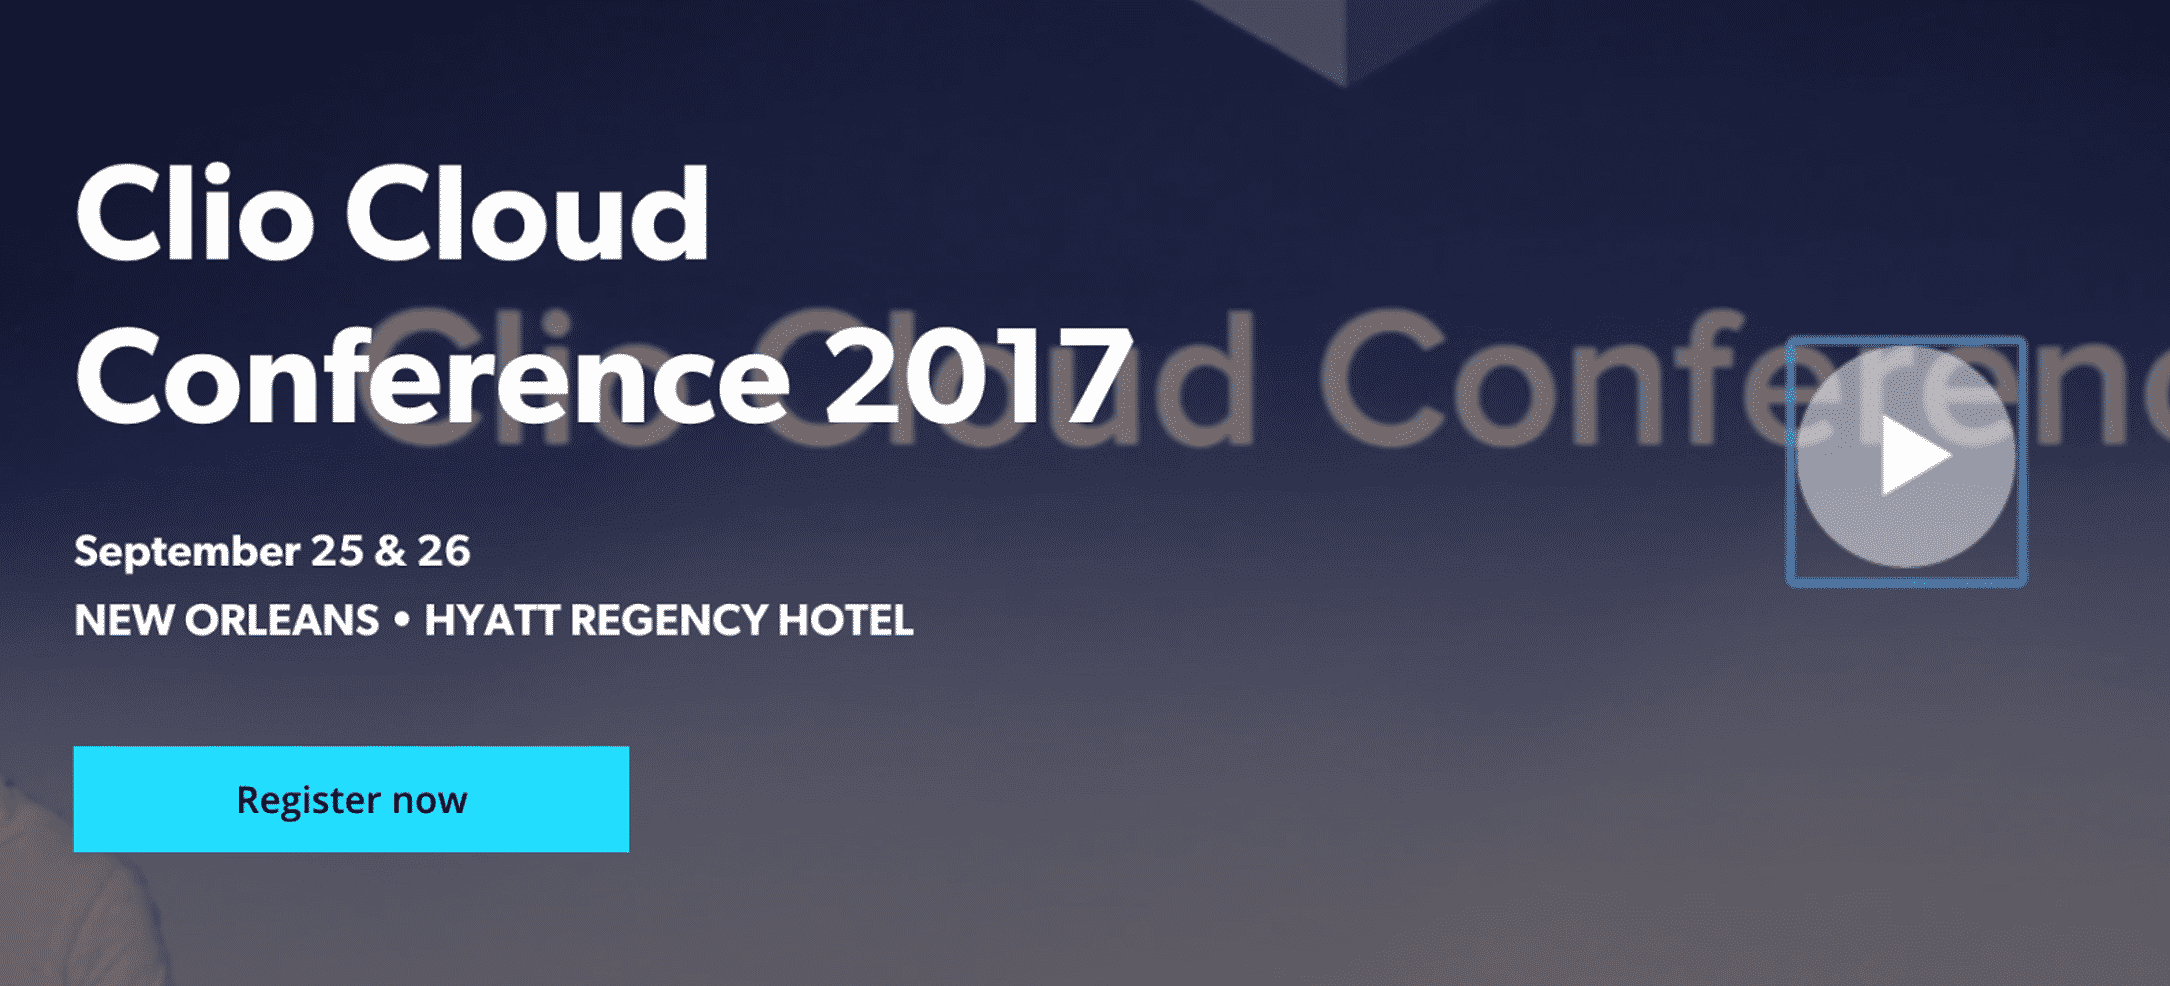 ion8 Rocking Clio Cloud Conference 2017 as a Gold CCC and Silver Sponsor